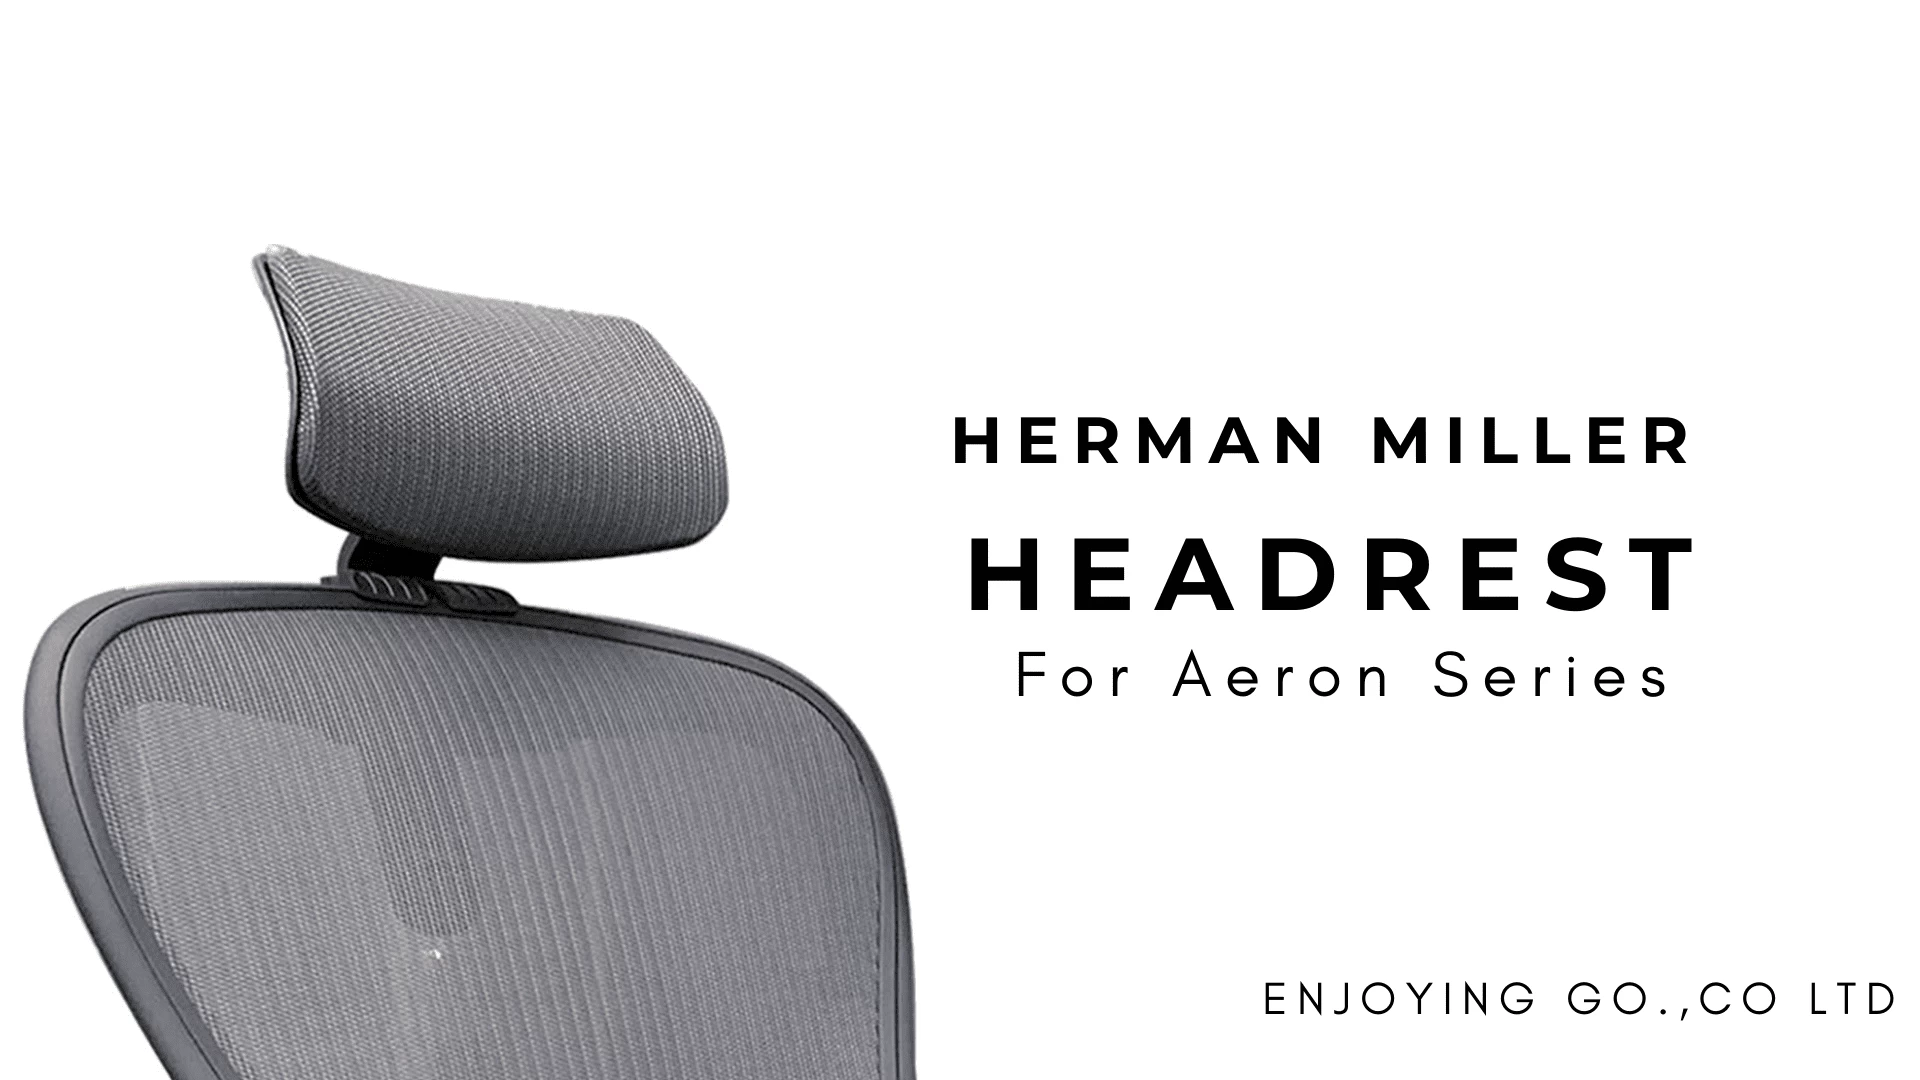 Enjoy Caster offers quality Herman Miller Aeron chair component